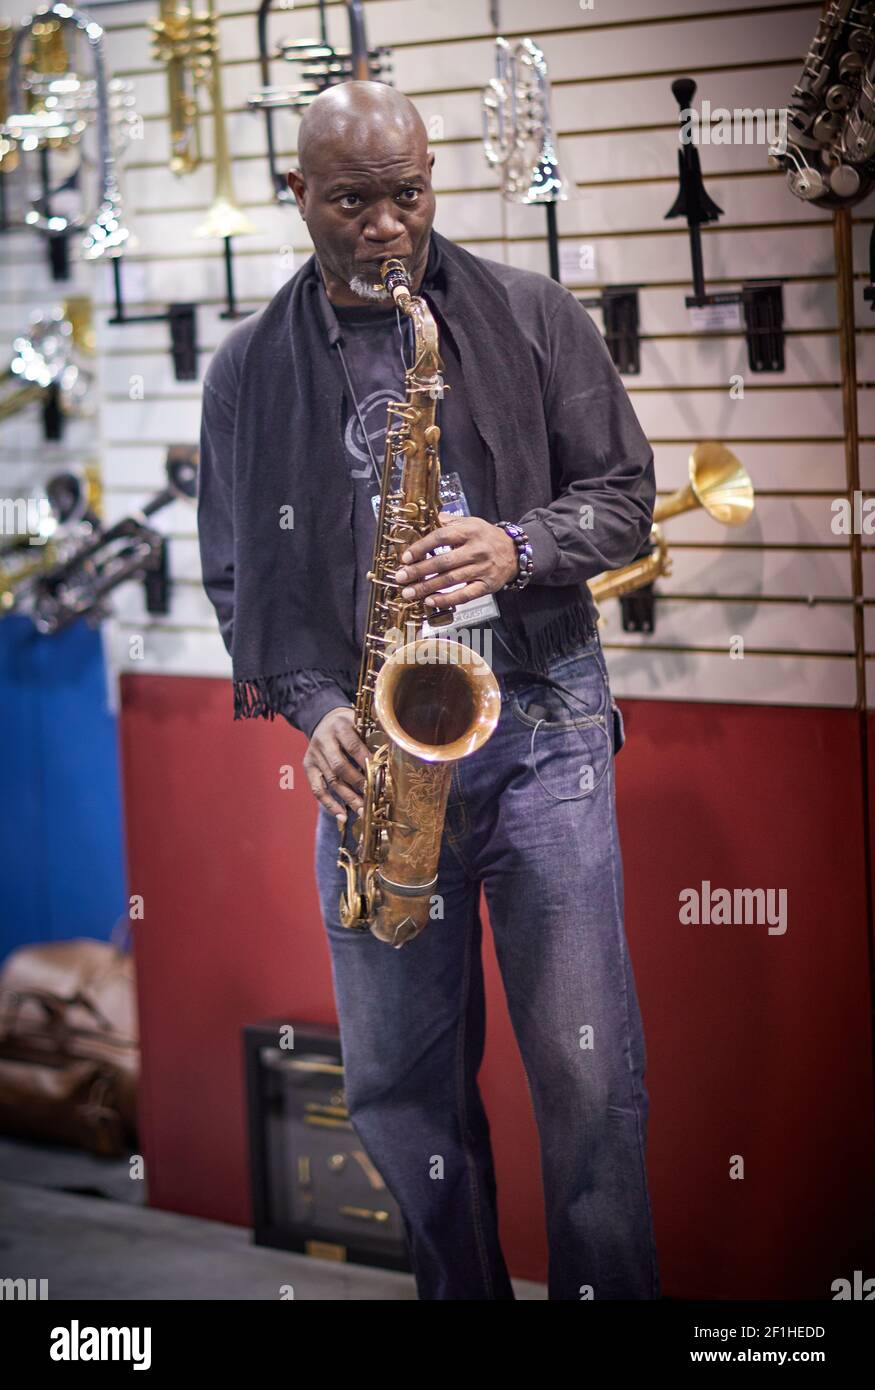 Black man playing alto sax at Musical Instrument Convention Stock Photo